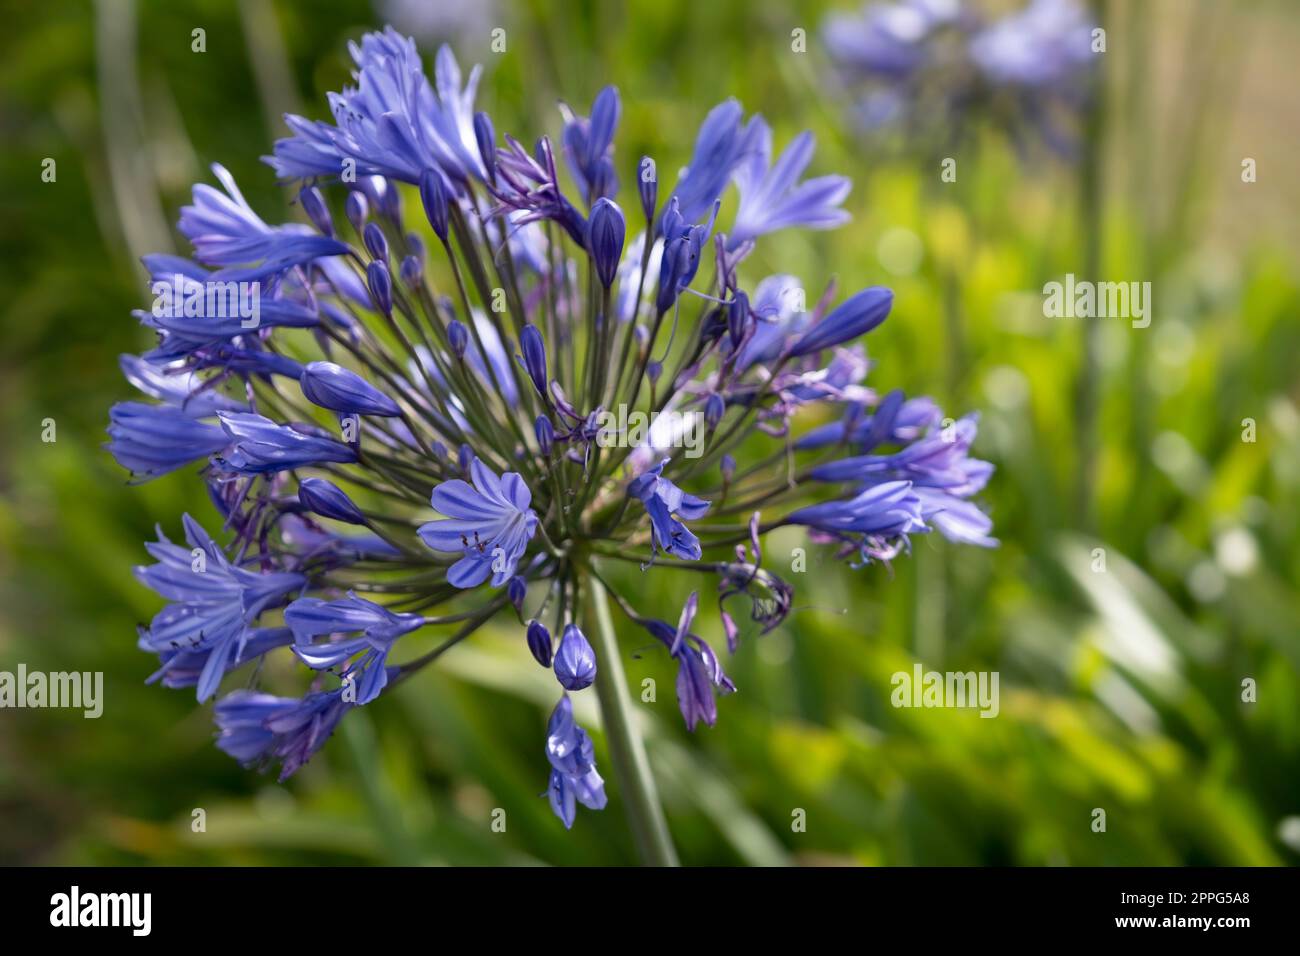 Blue agapanthus, or Lily of the Nile in Tasmania. Blurred green background Stock Photo